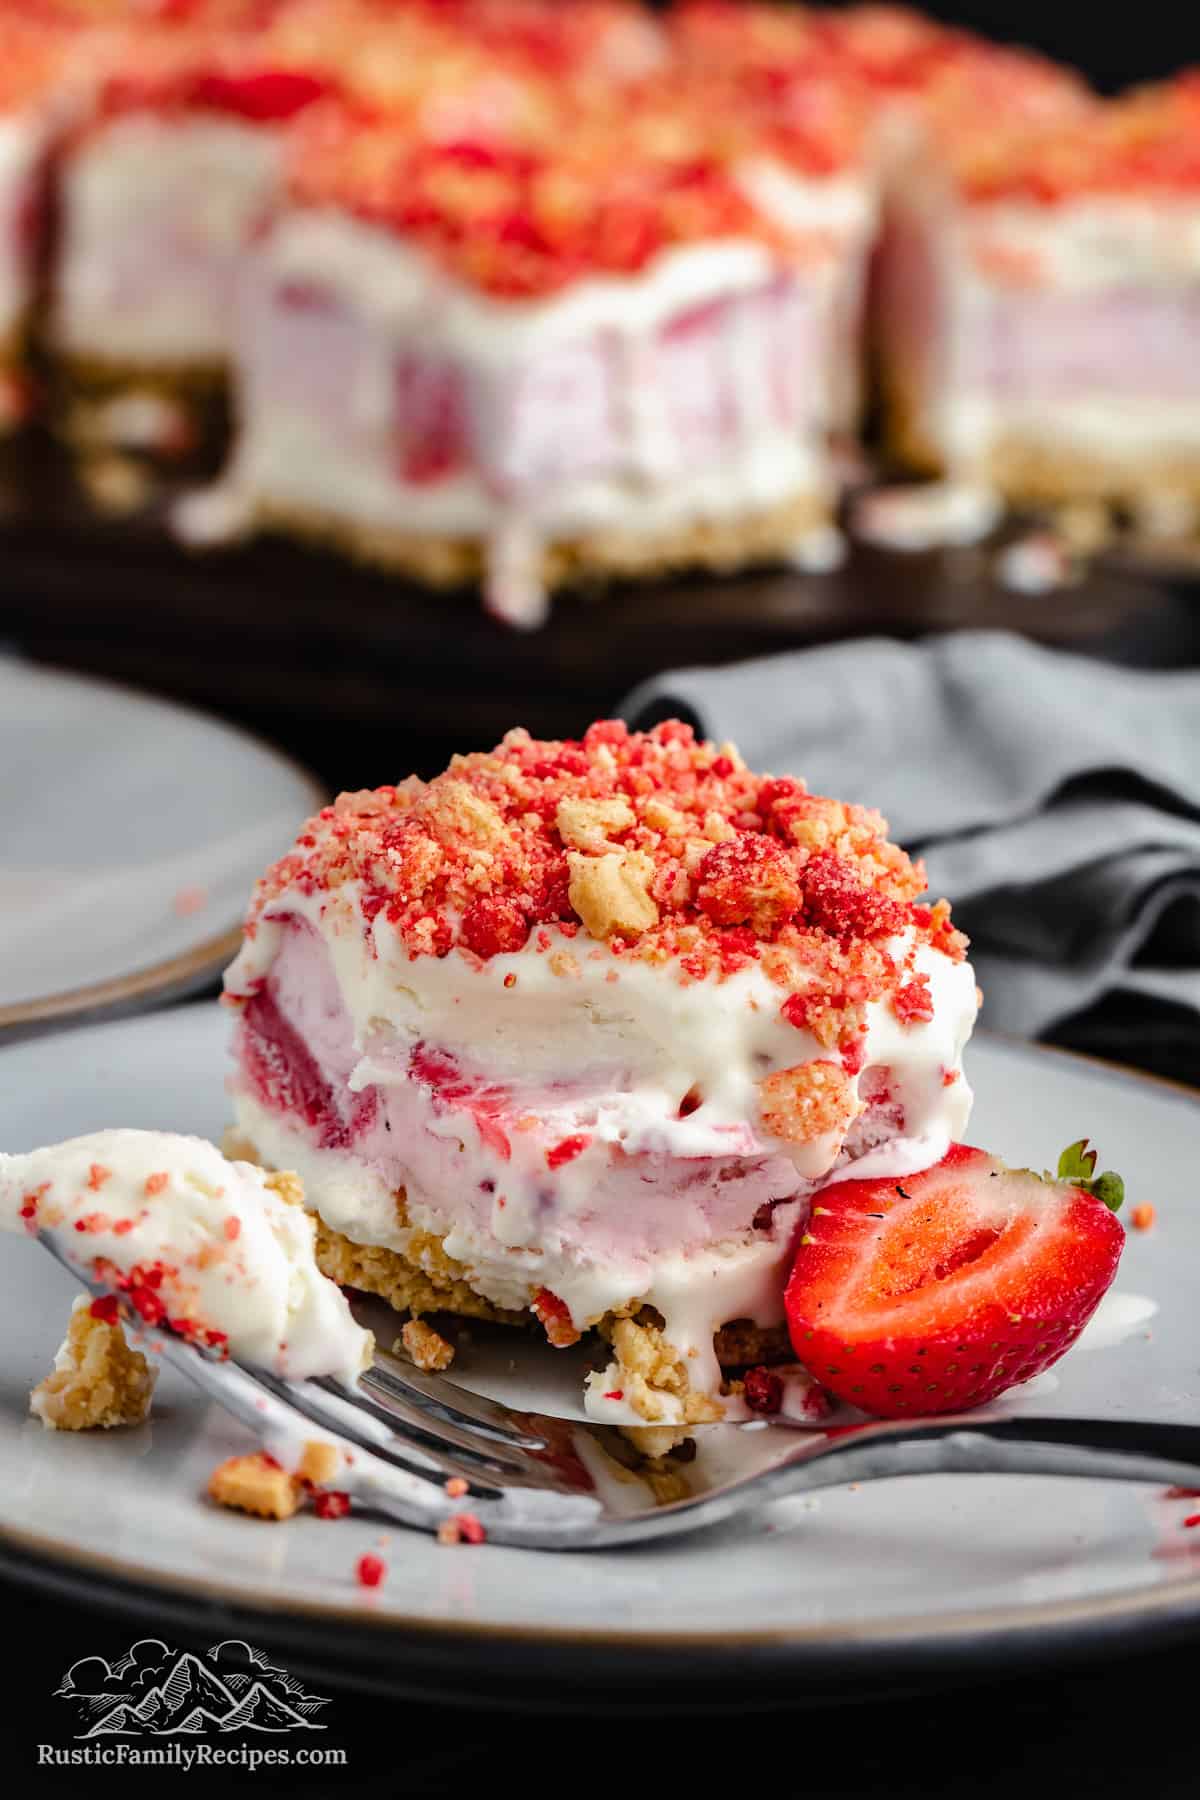 A fork cuts into a strawberry shortcake ice cream bar on a plate next to half of a fresh strawberry, with more bars in the background.